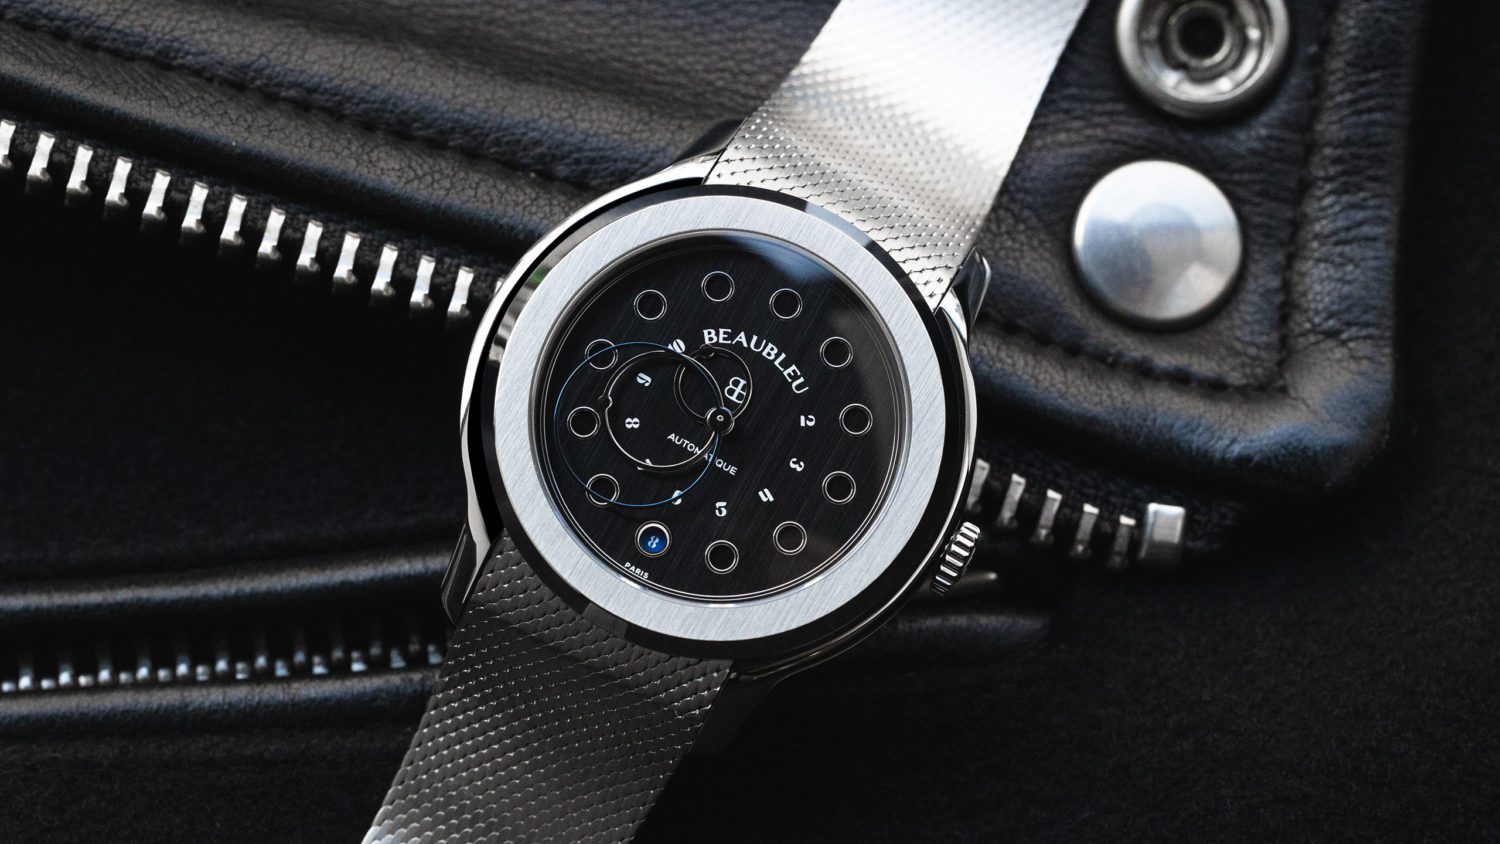 <p class="p1">The Vitruve Date Black’s brutalist inspiration highlights the contrast between each part and its craftsmanship. The brushed steel dial blends into its matte and polished case, where you can sight the discreet and readable date at 6.</p>